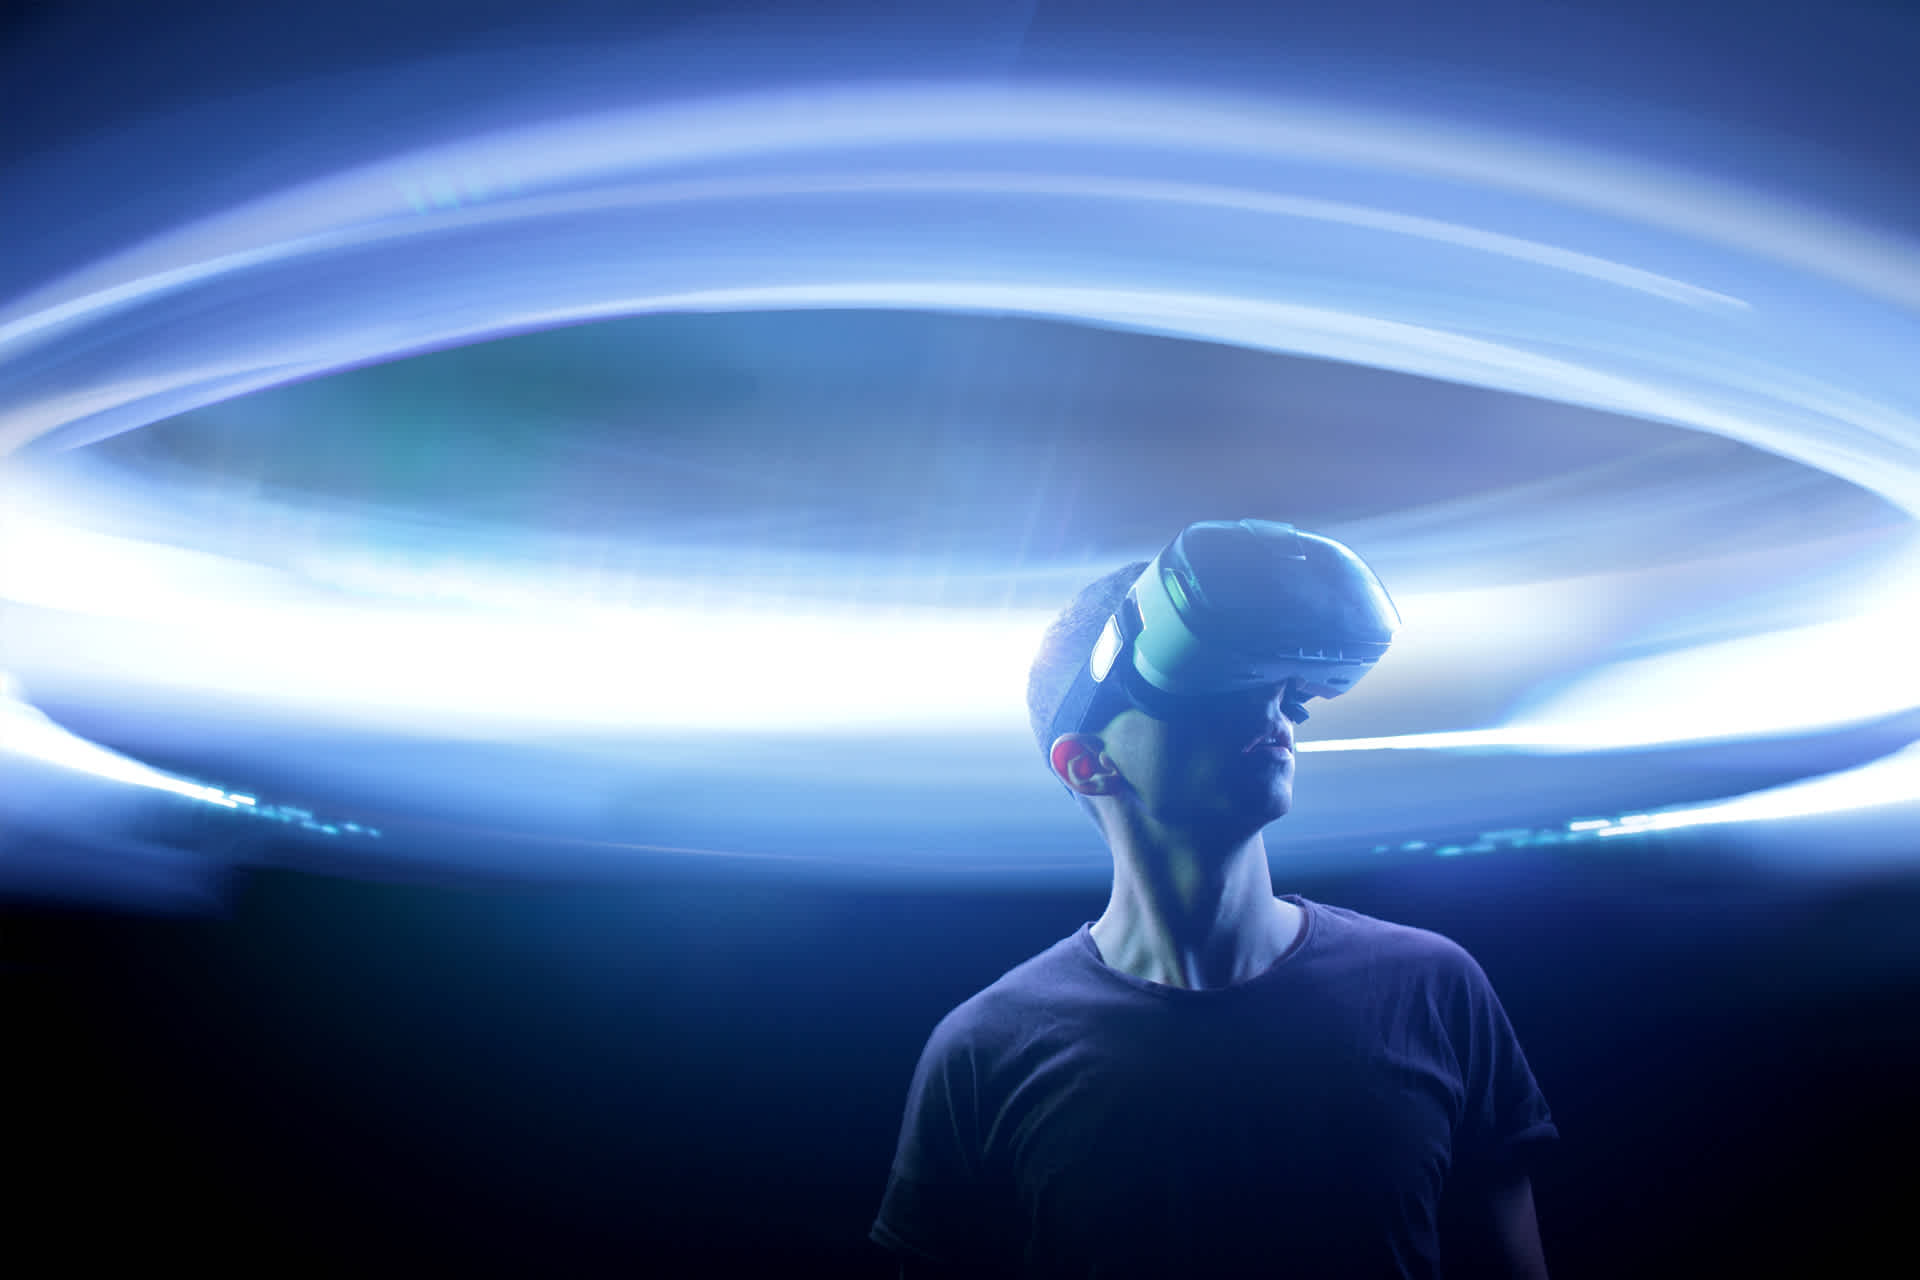 A teenager wearing a virtual reality headset stands in a dark room with a halo of light surrounding him